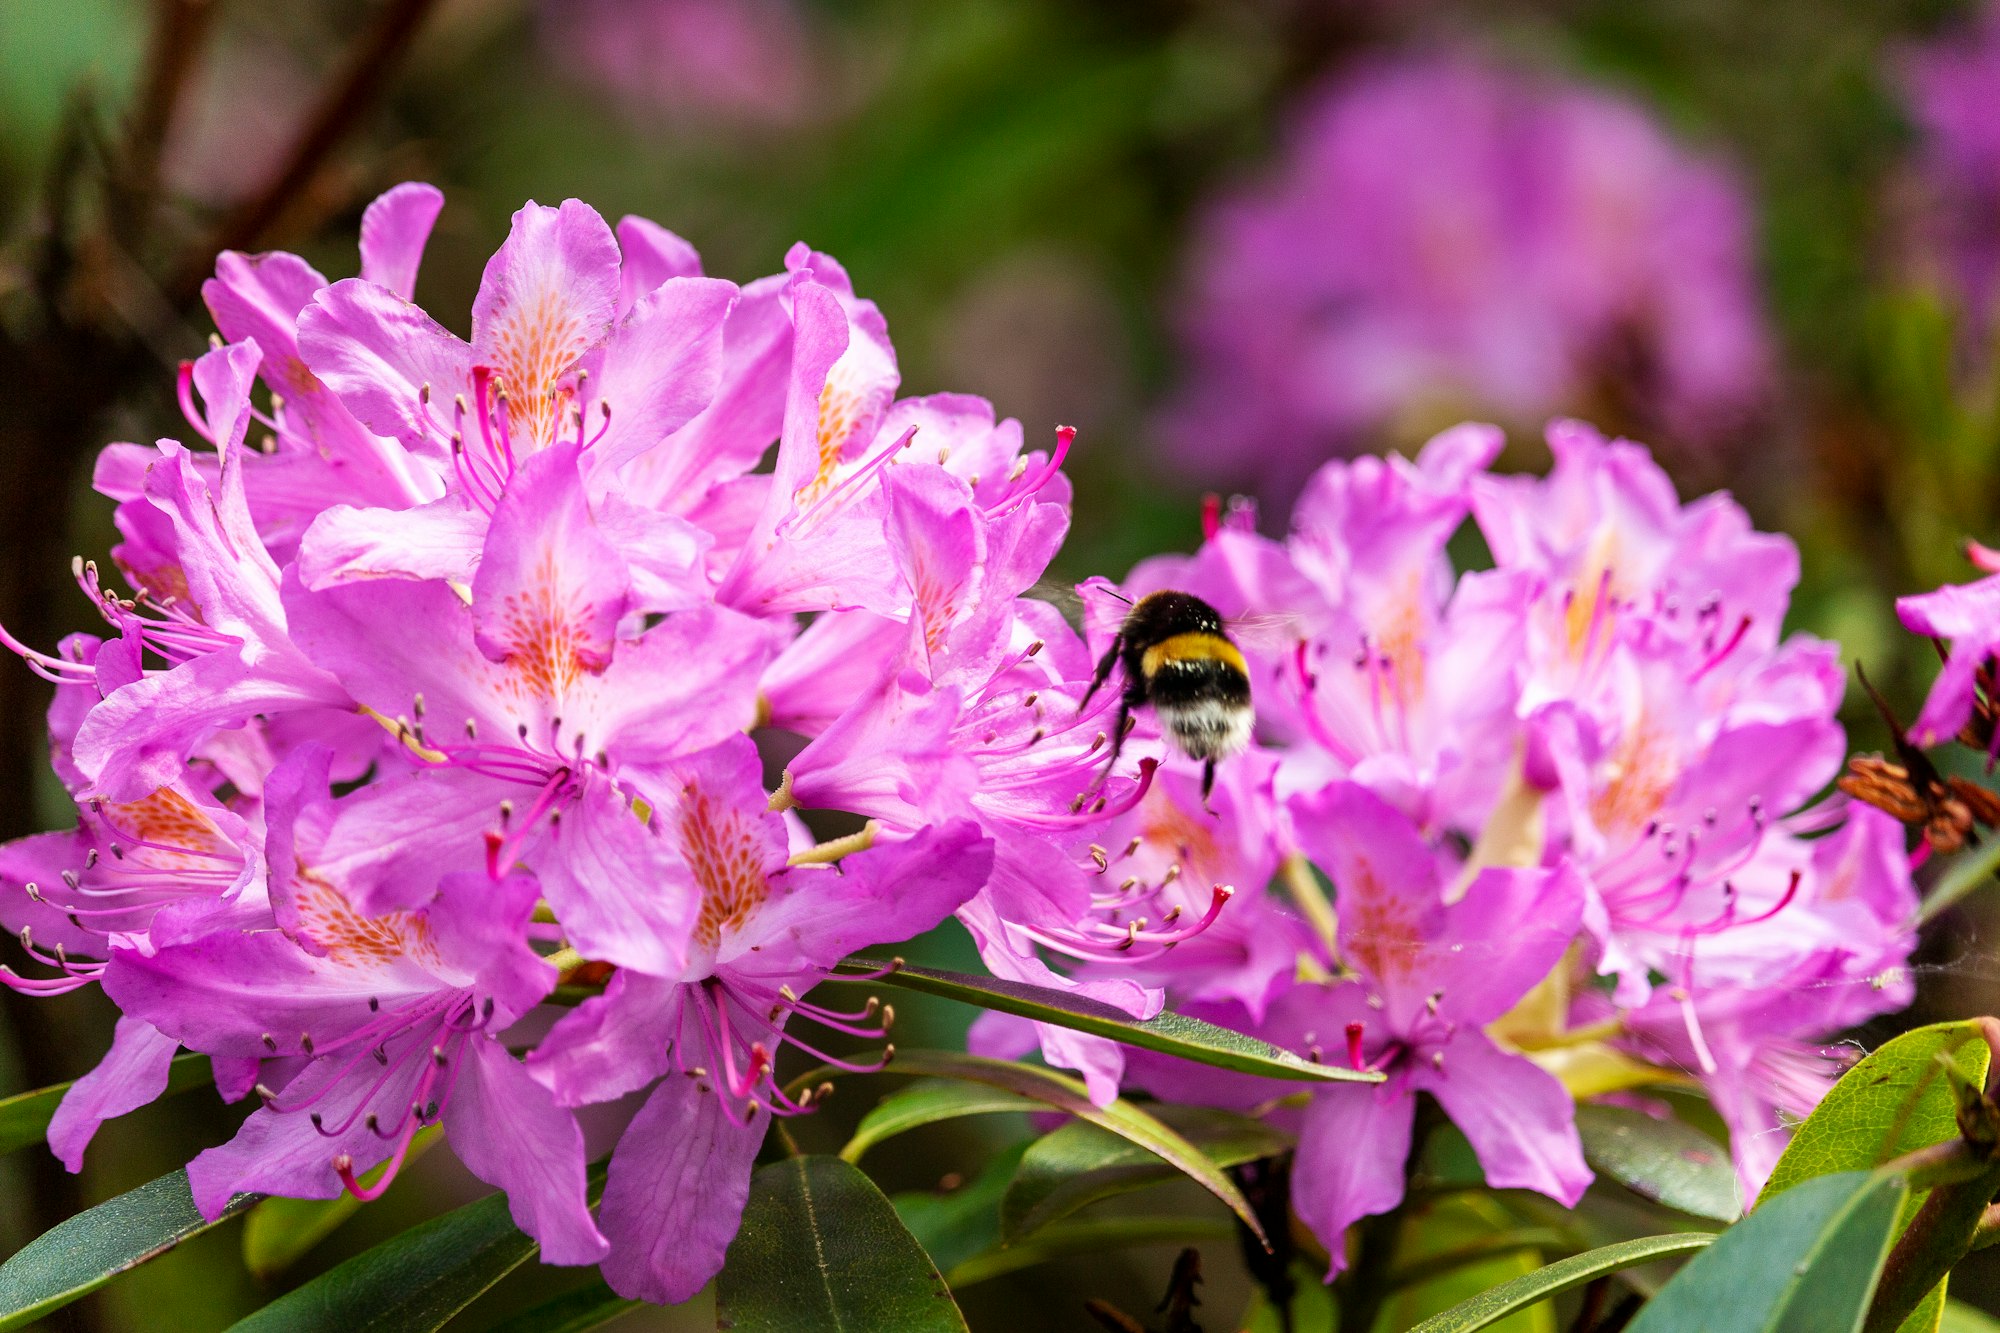 Bumblebee gathering nectar on a Rhododendron